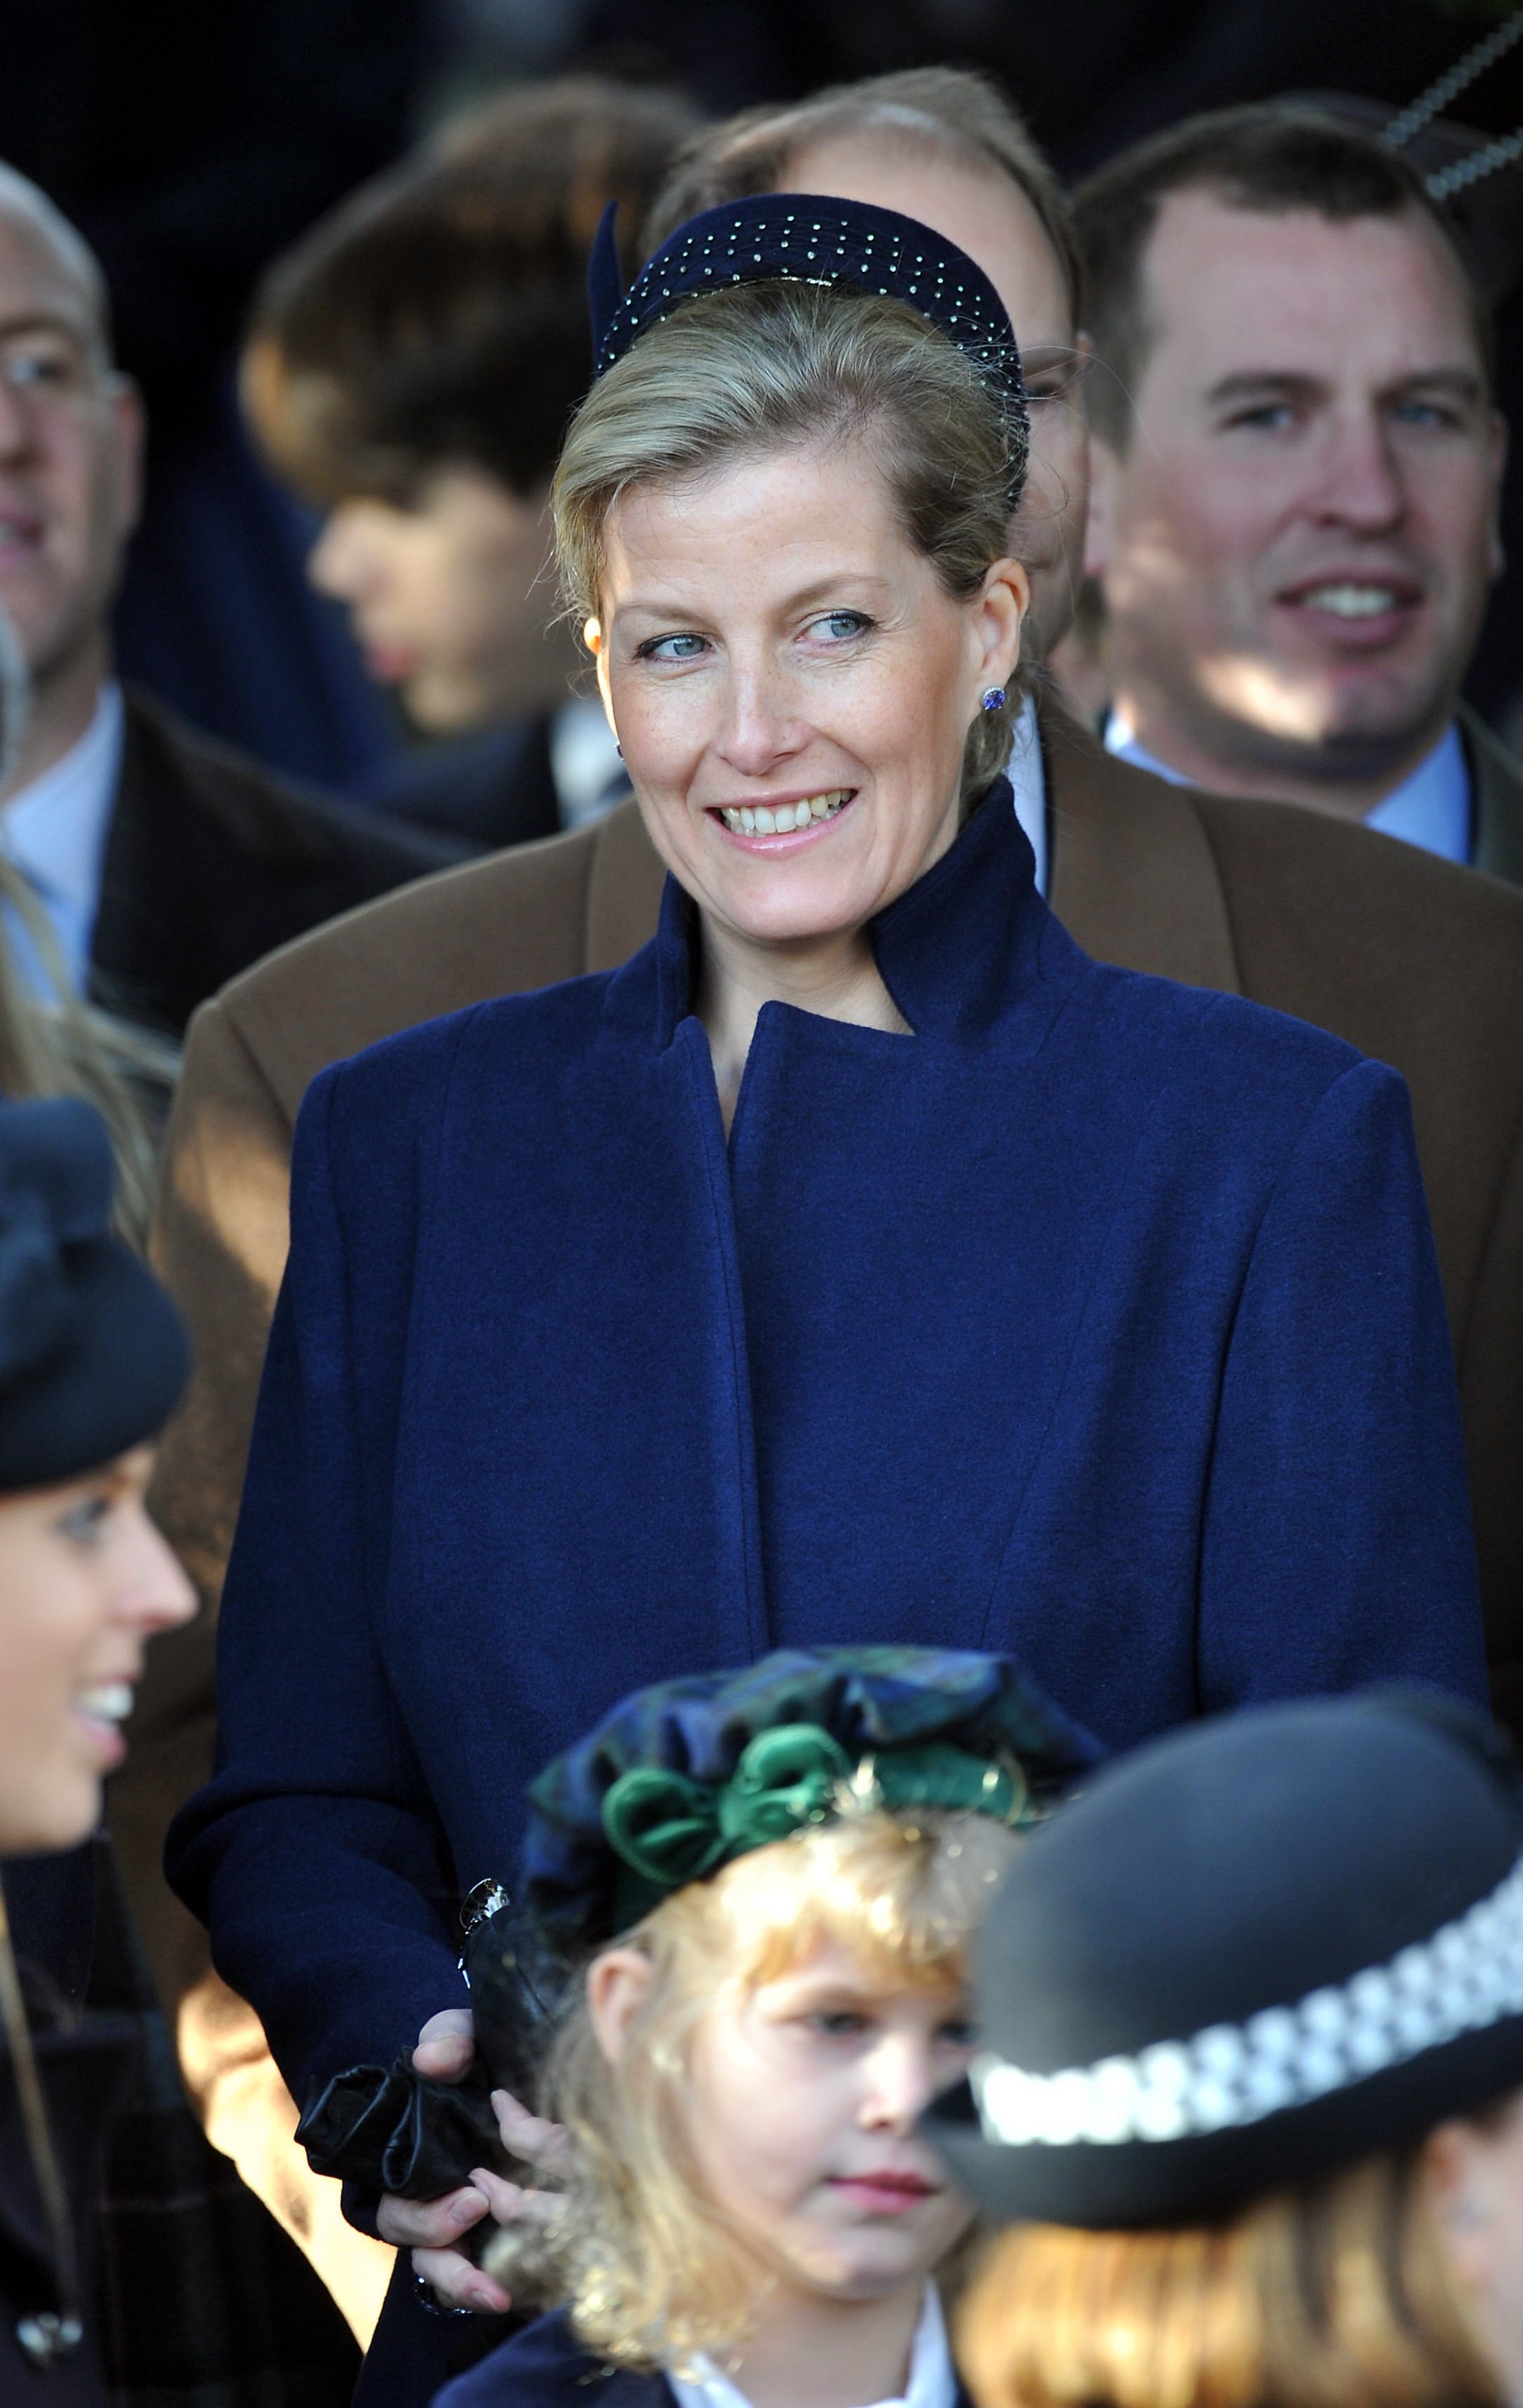 Britain's Sophie Countess of Wessex , wife of Prince Edward, Earl of Wessex, attends the Royal family Christmas Day church service at St Mary Magdalene Church in Sandringham, Norfolk, eastern England, on December 25, 2011  | Source: Getty Images